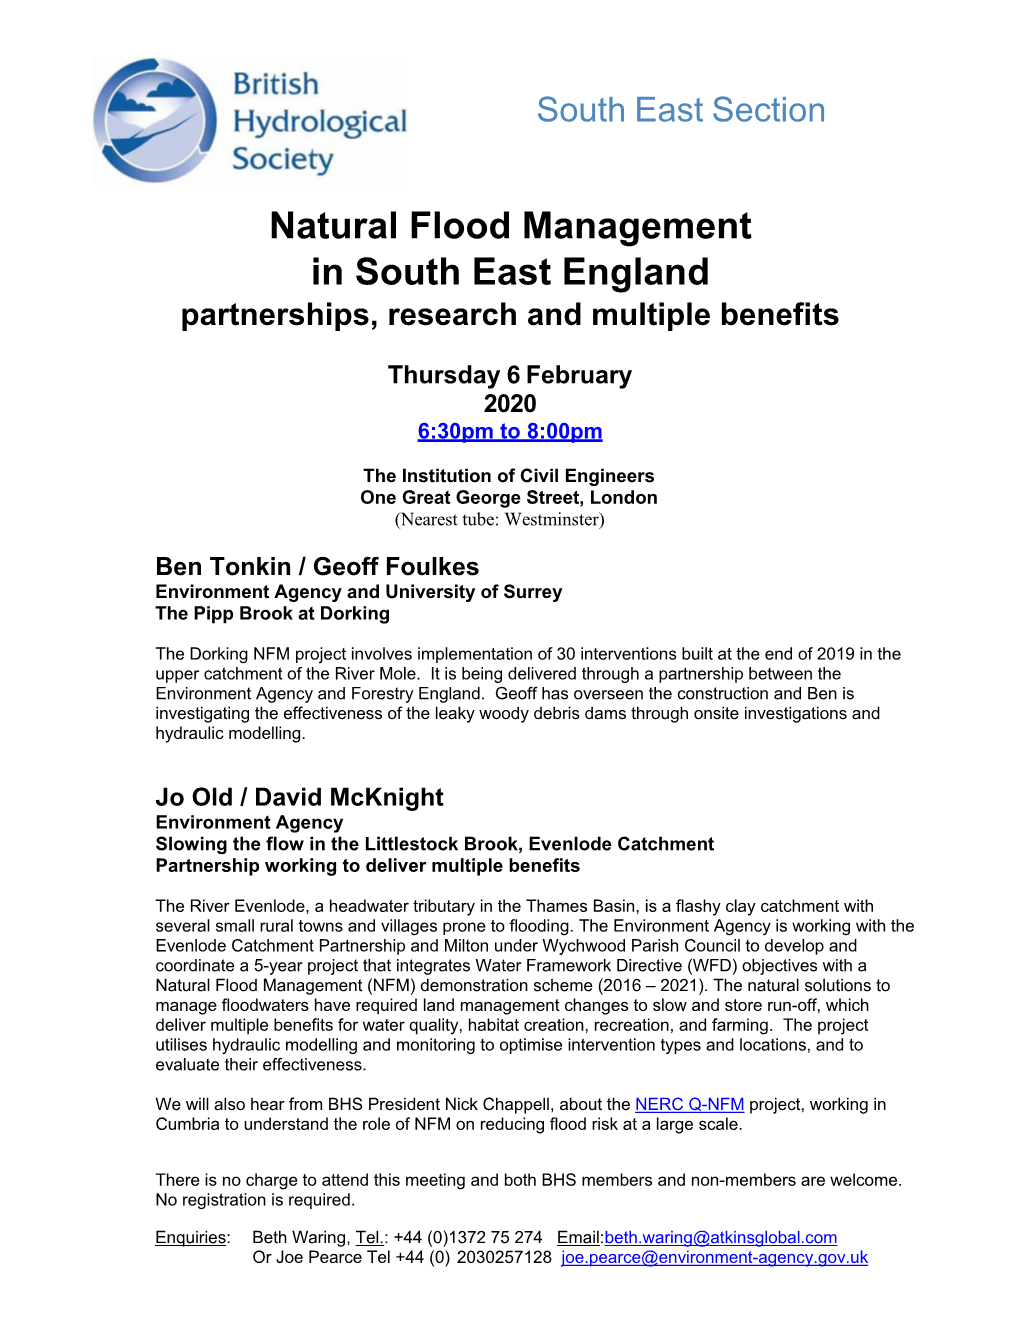 Natural Flood Management in South East England Partnerships, Research and Multiple Benefits